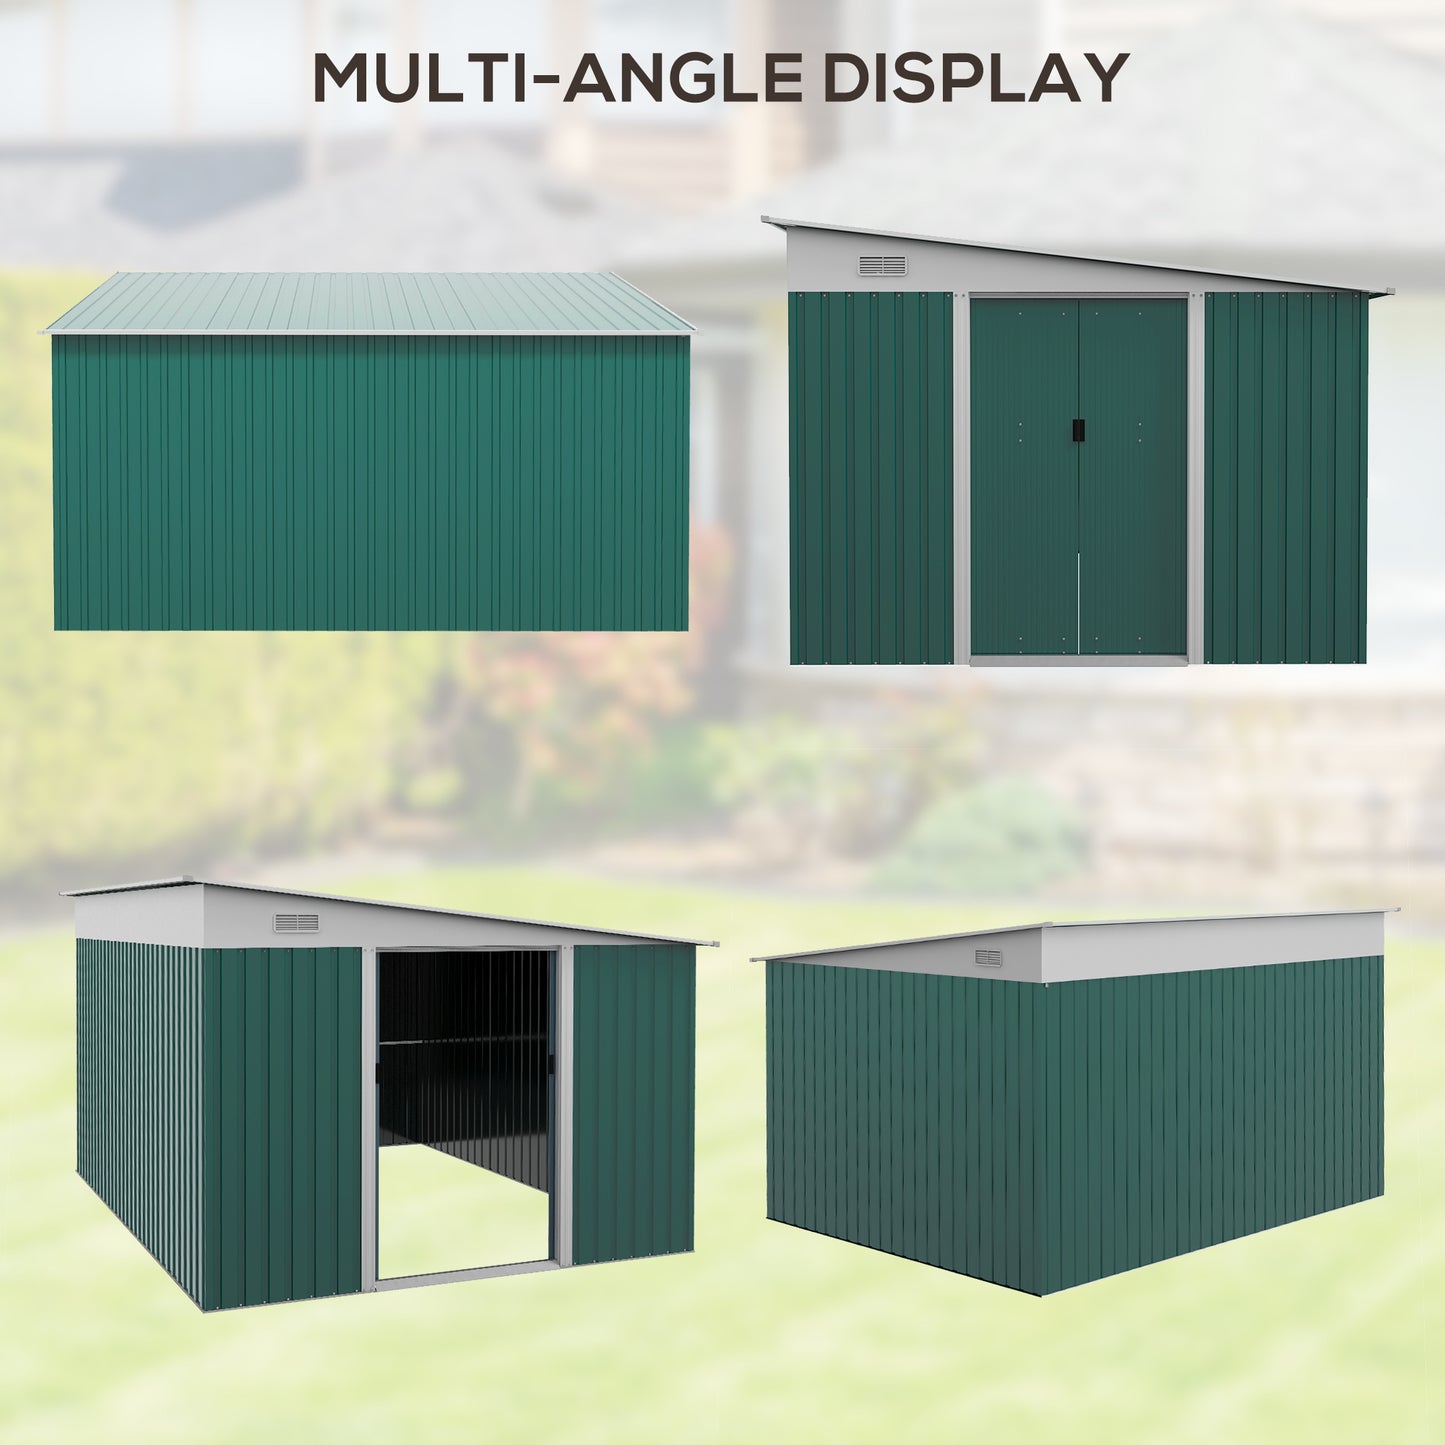 Outsunny Garden Metal Storage Shed Outdoor Metal Tool House with Double Sliding Doors and 2 Air Vents, 11.3x9.2ft, Green